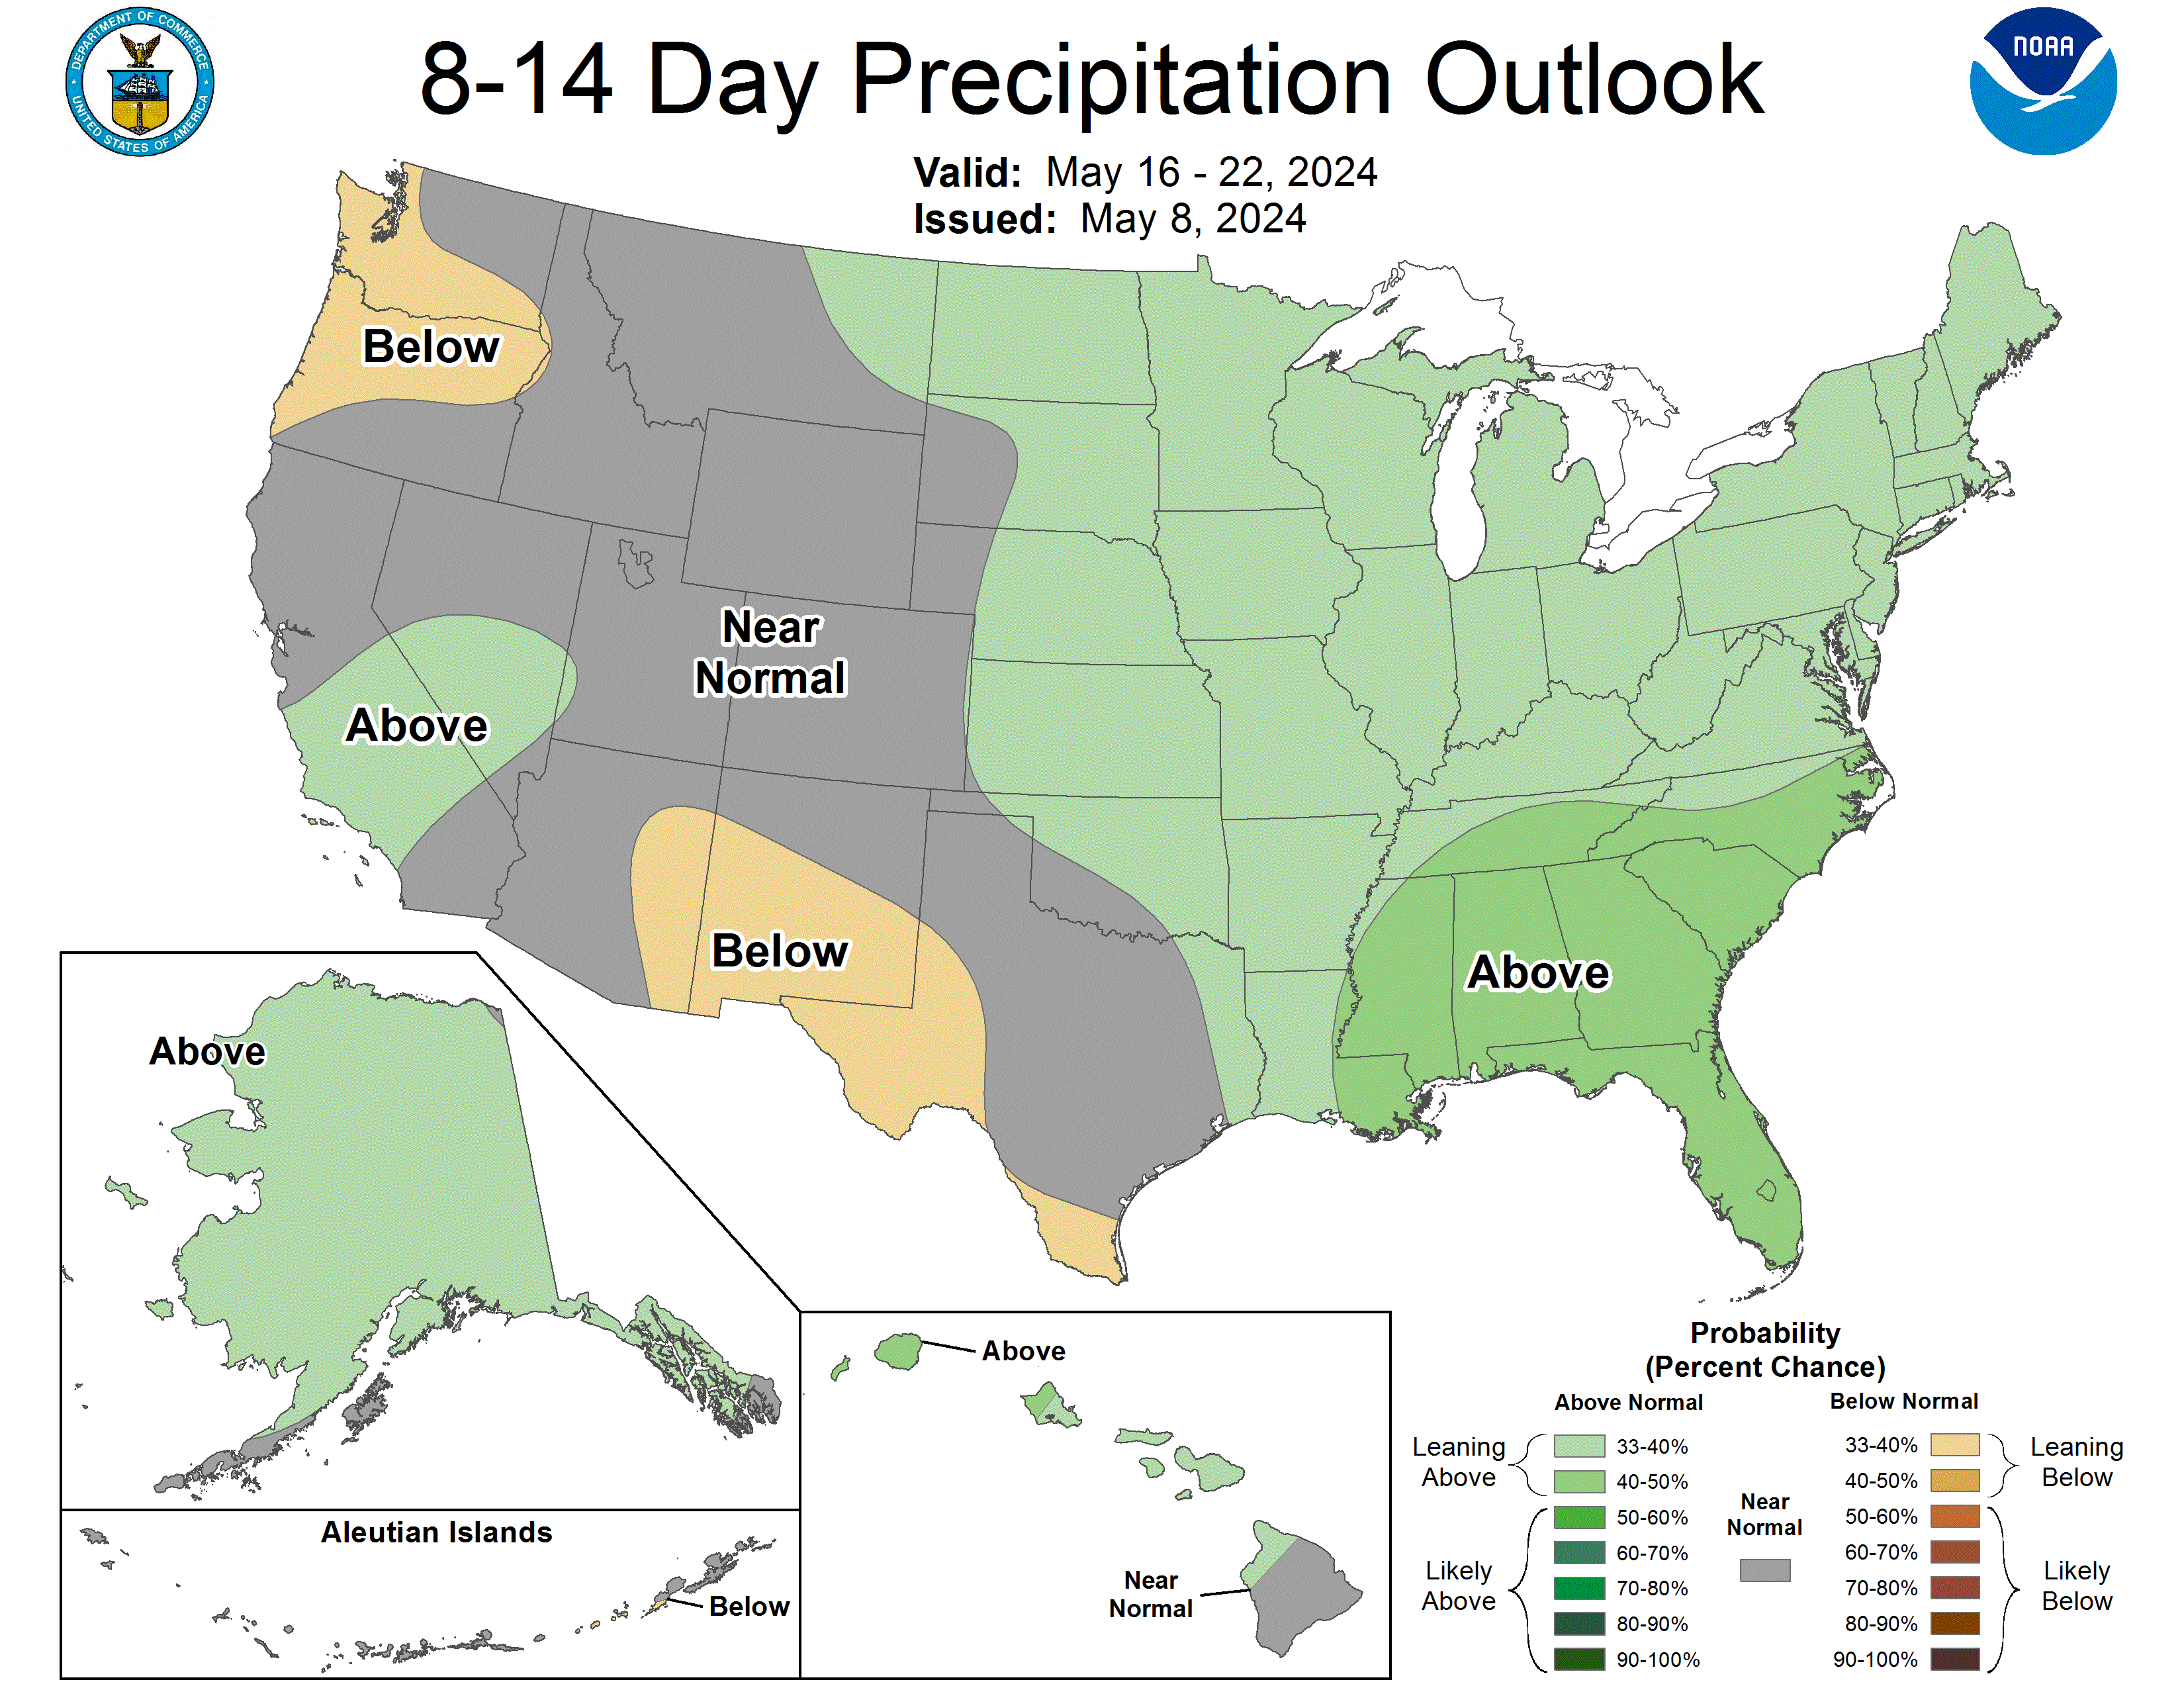 http://www.cpc.ncep.noaa.gov/products/predictions/814day/814prcp.new.gif